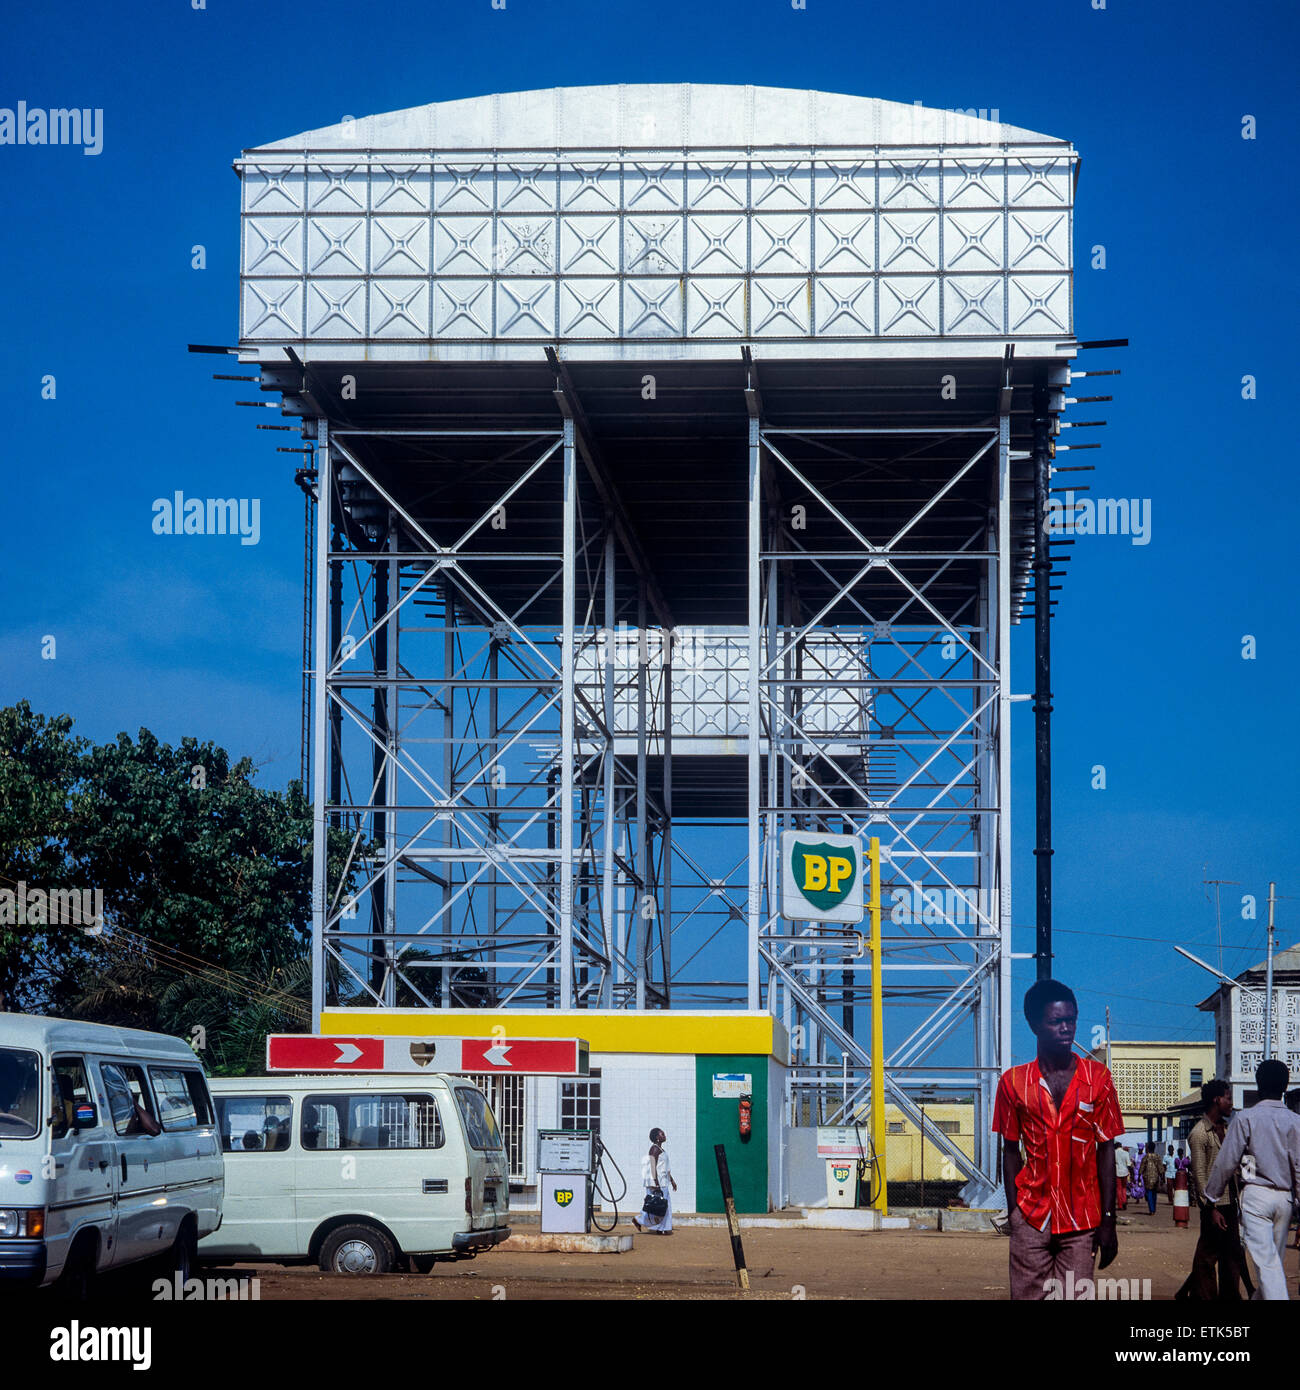 BP Petrol station with elevated tanks, Banjul, Gambia, West Africa Stock Photo